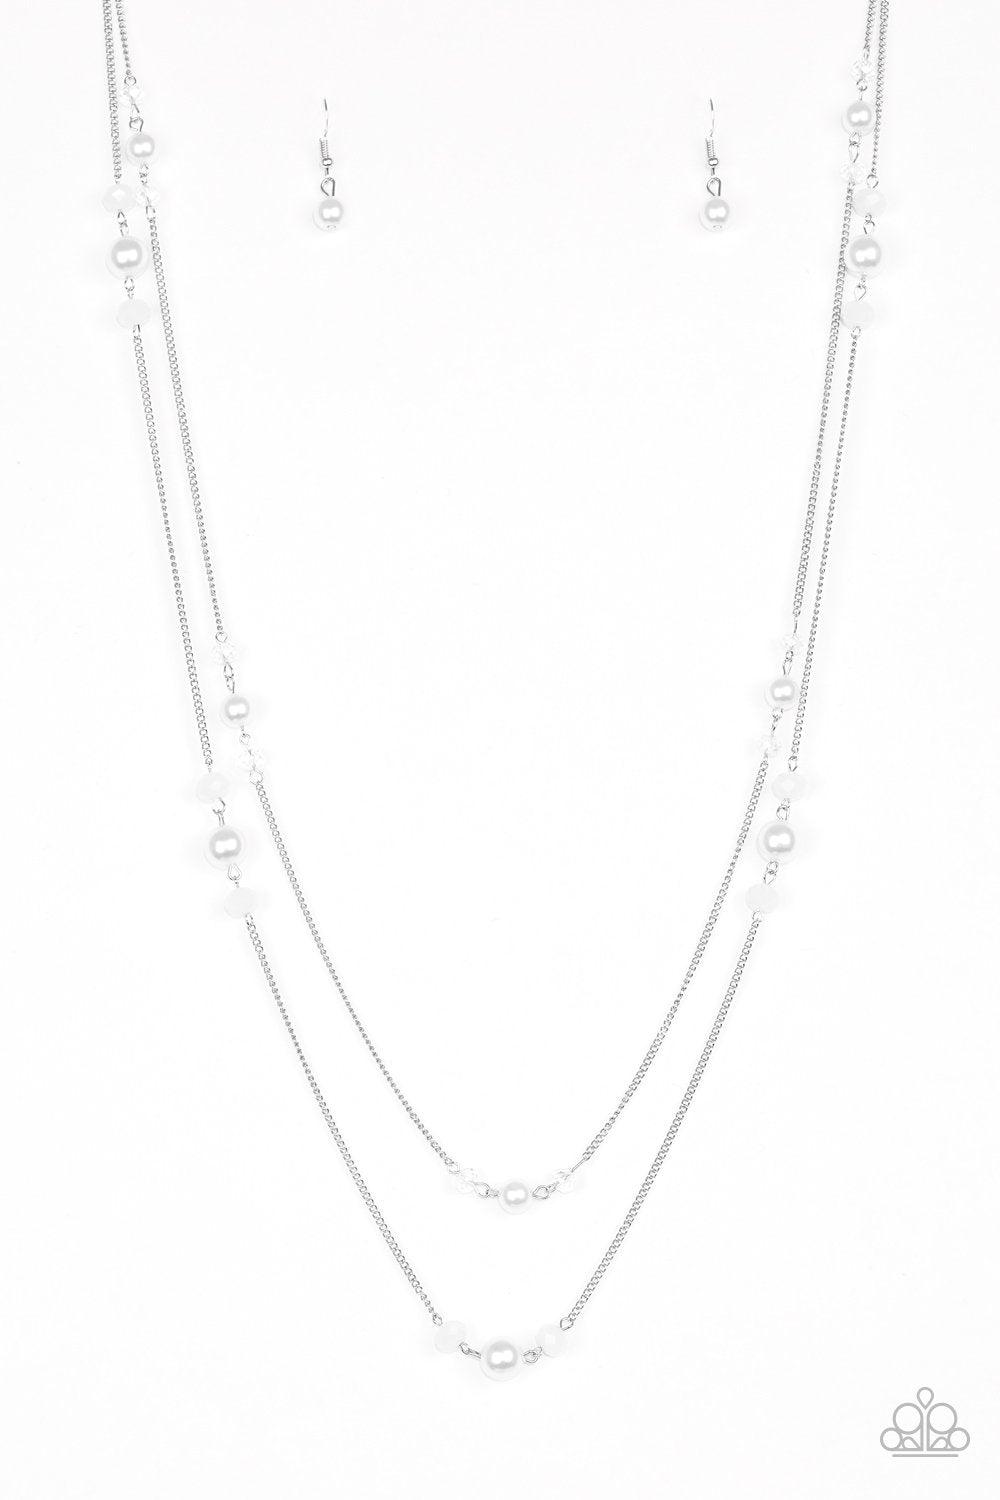 Spring Splash Silver and White Necklace - Paparazzi Accessories-CarasShop.com - $5 Jewelry by Cara Jewels